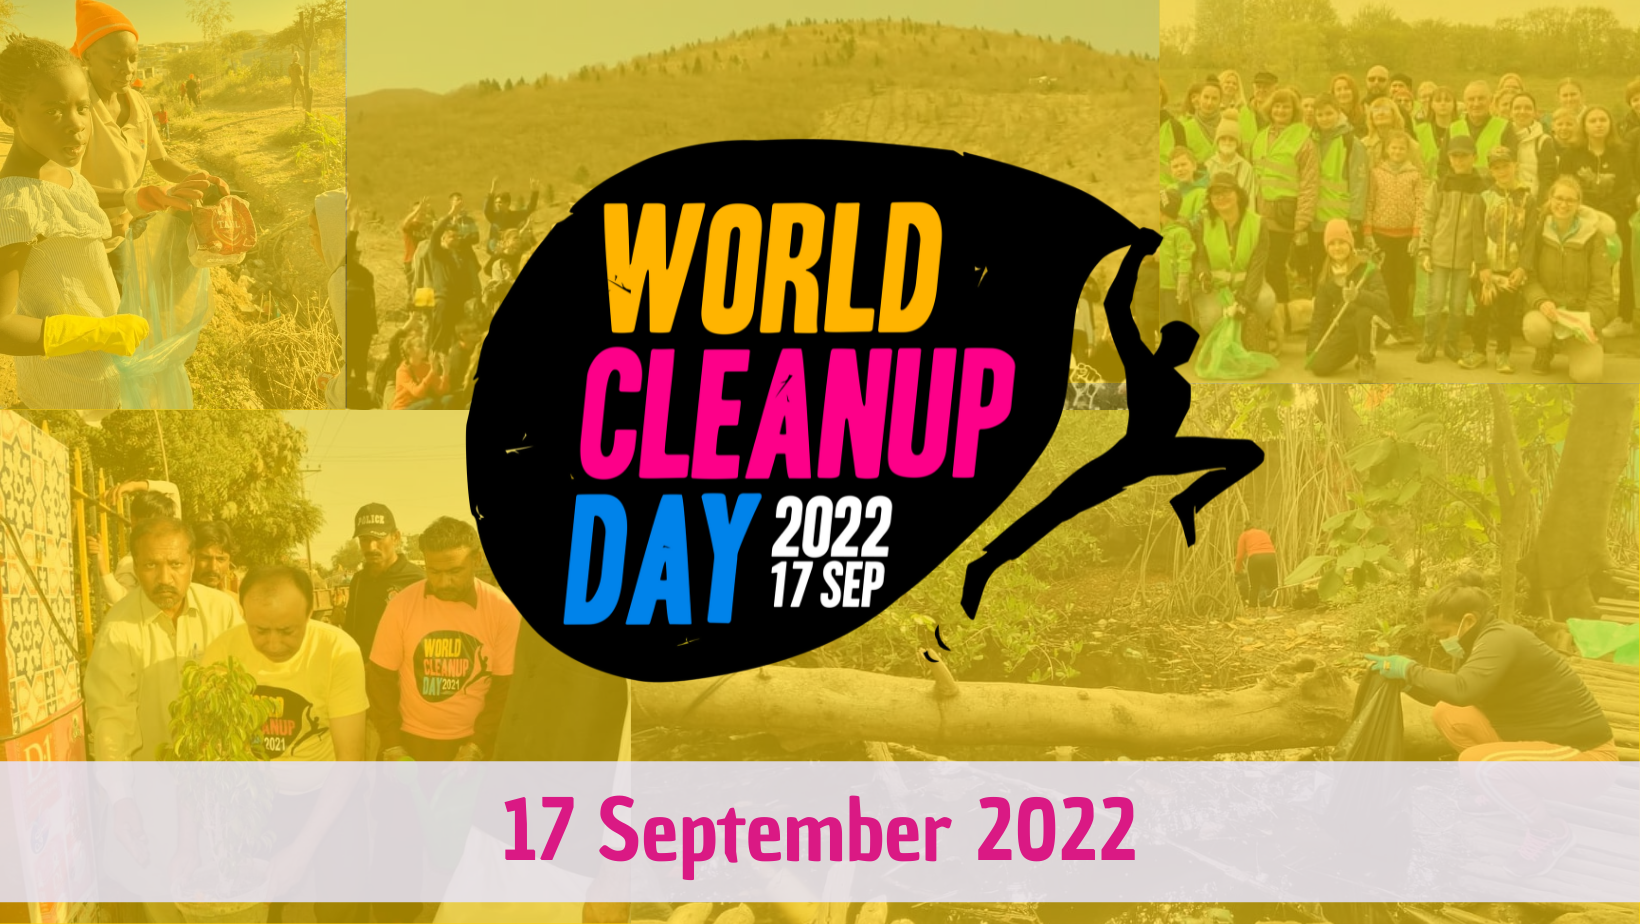 World clean up day logo